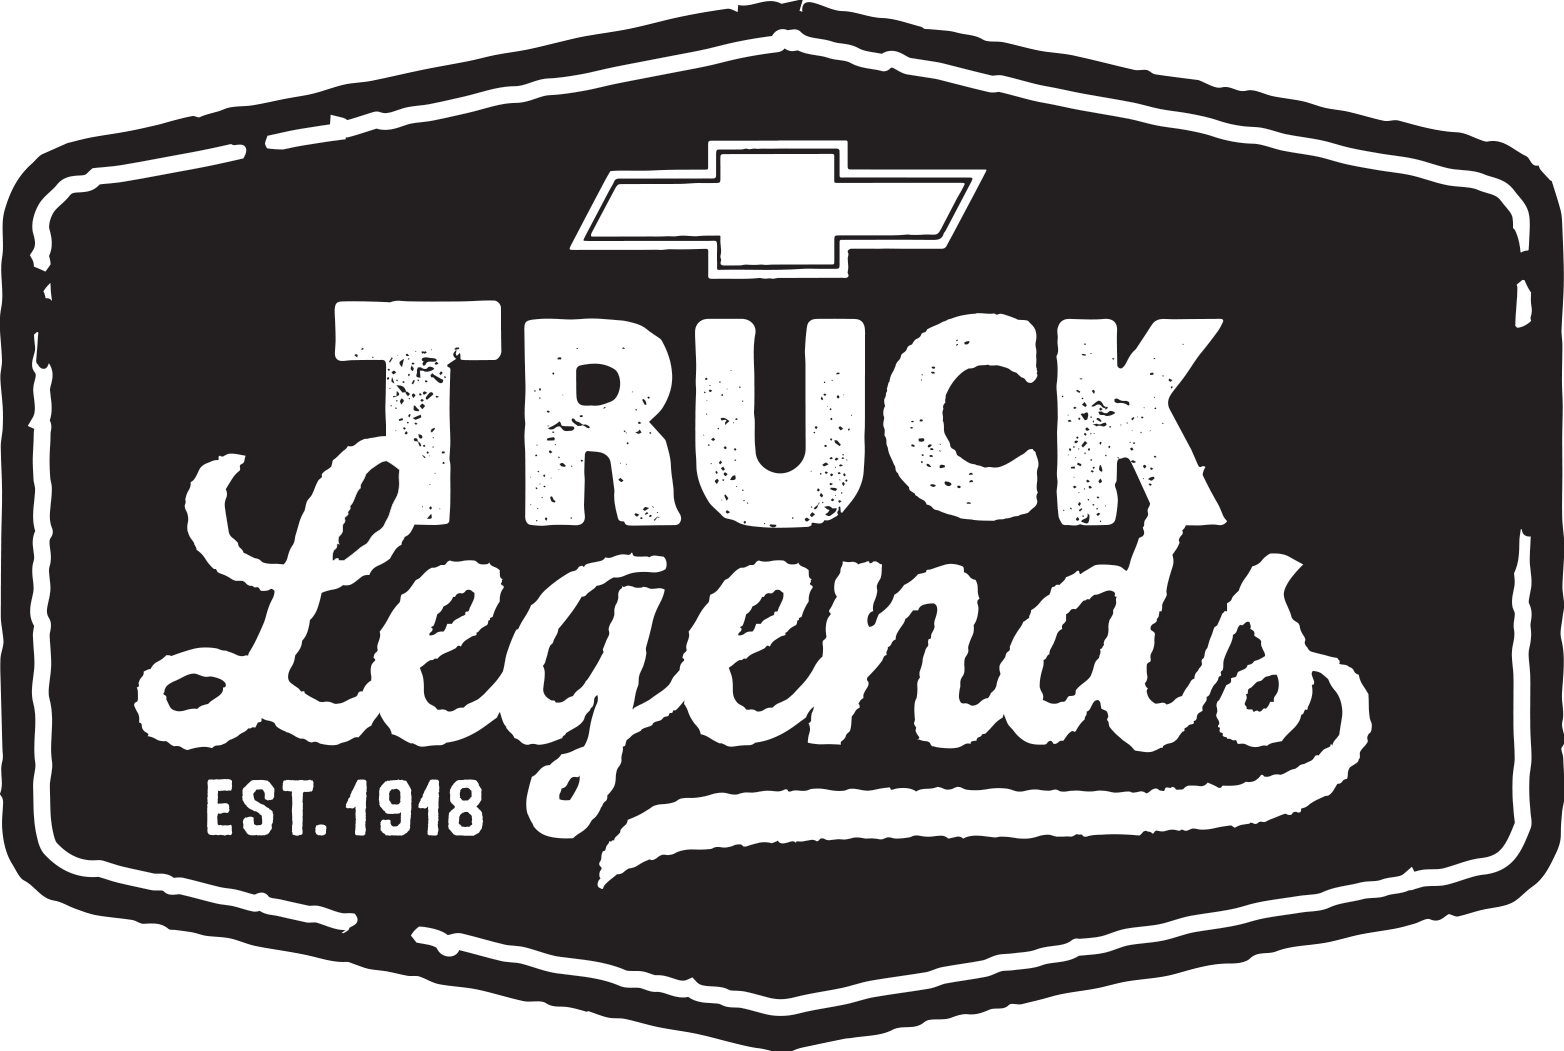 Chevy Truck Logo - Register to Join Chevy Truck Legends | Chevrolet